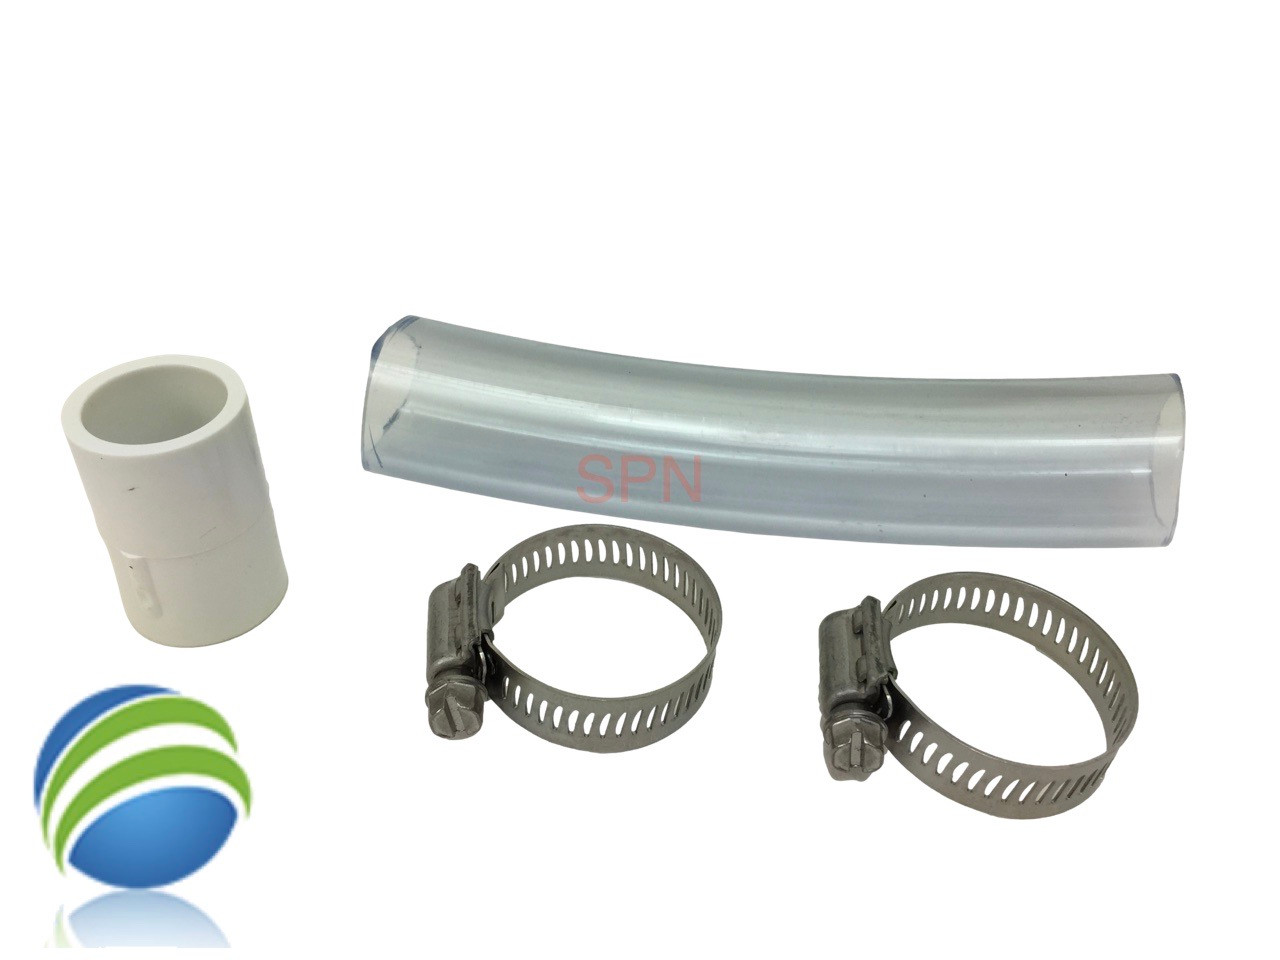 Rico Kit to Repair 1/2" or 3/4" Soft Pipe Leaks at Jet Bodies and other Fittings